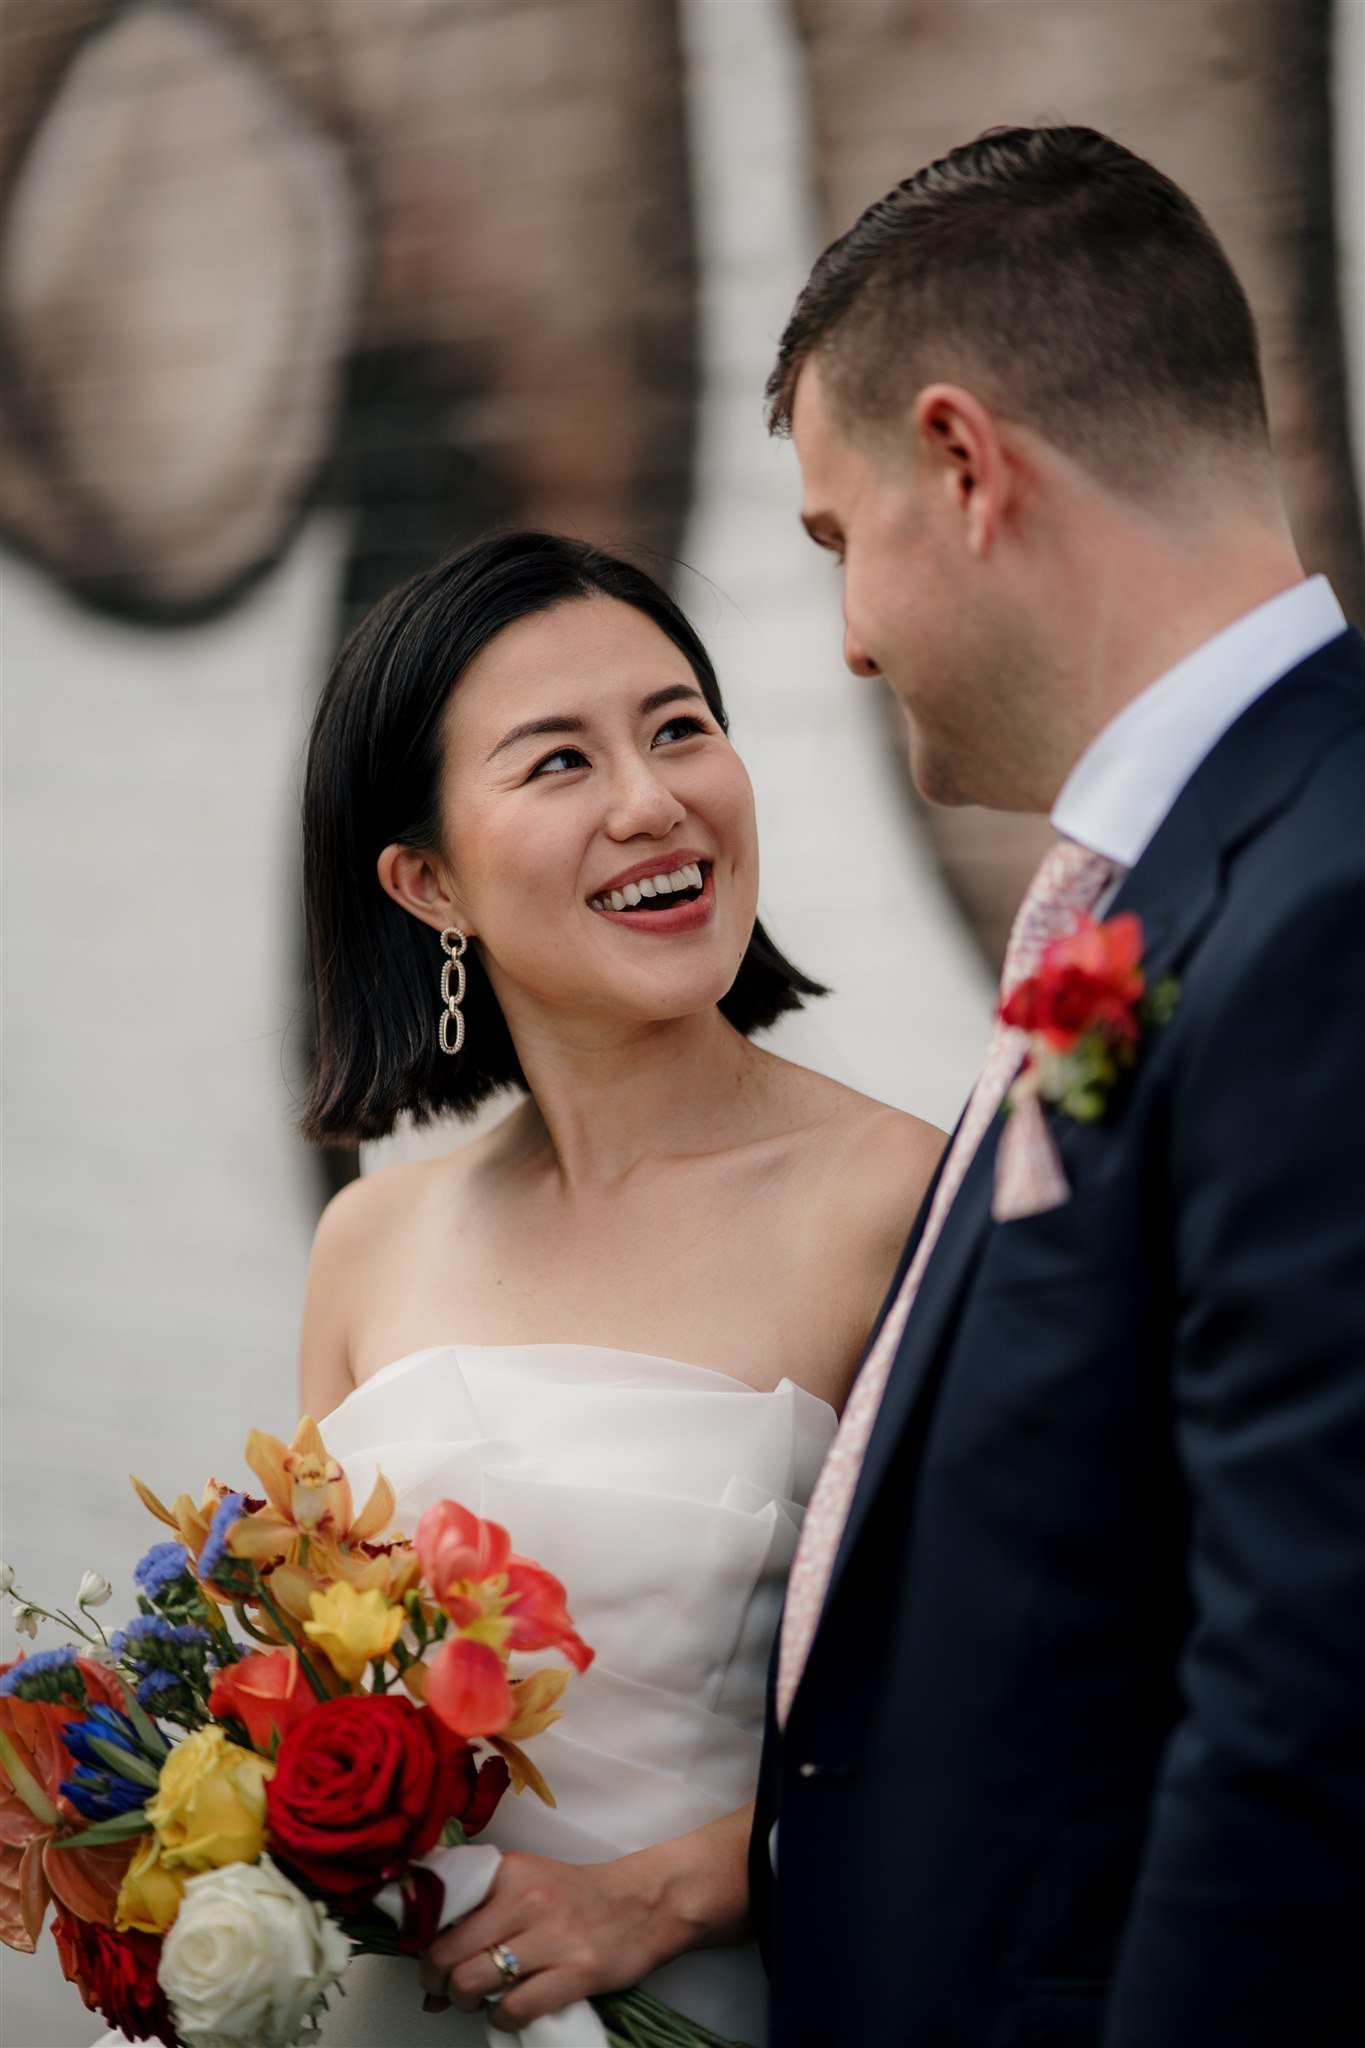 glasshouse-morningside-urban-best-auckland-wedding-venue-central-indoor-photographer-videographer-dear-white-productions-top-industrial-chinese-ceremony-tradition (102).jpg